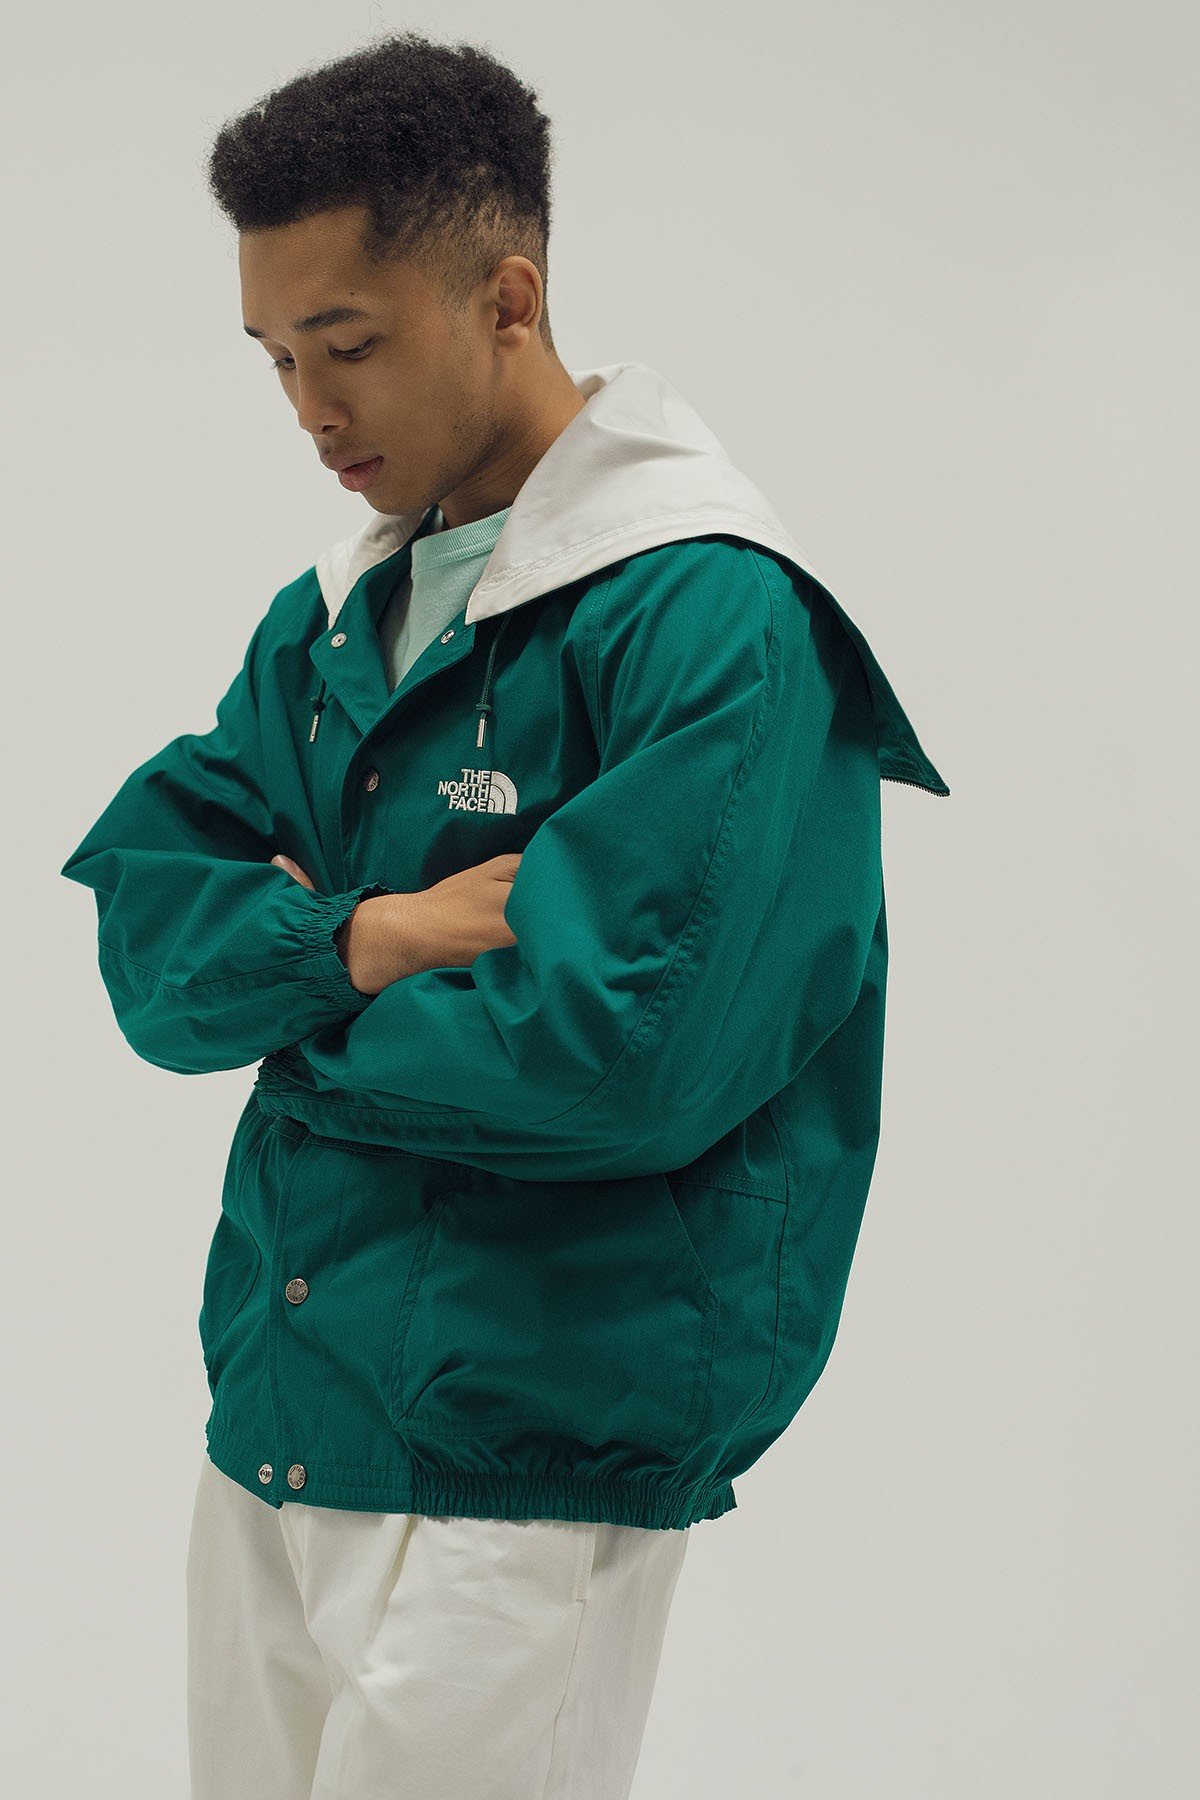 monkey time and The North Face Purple Label Link Up for SS22 